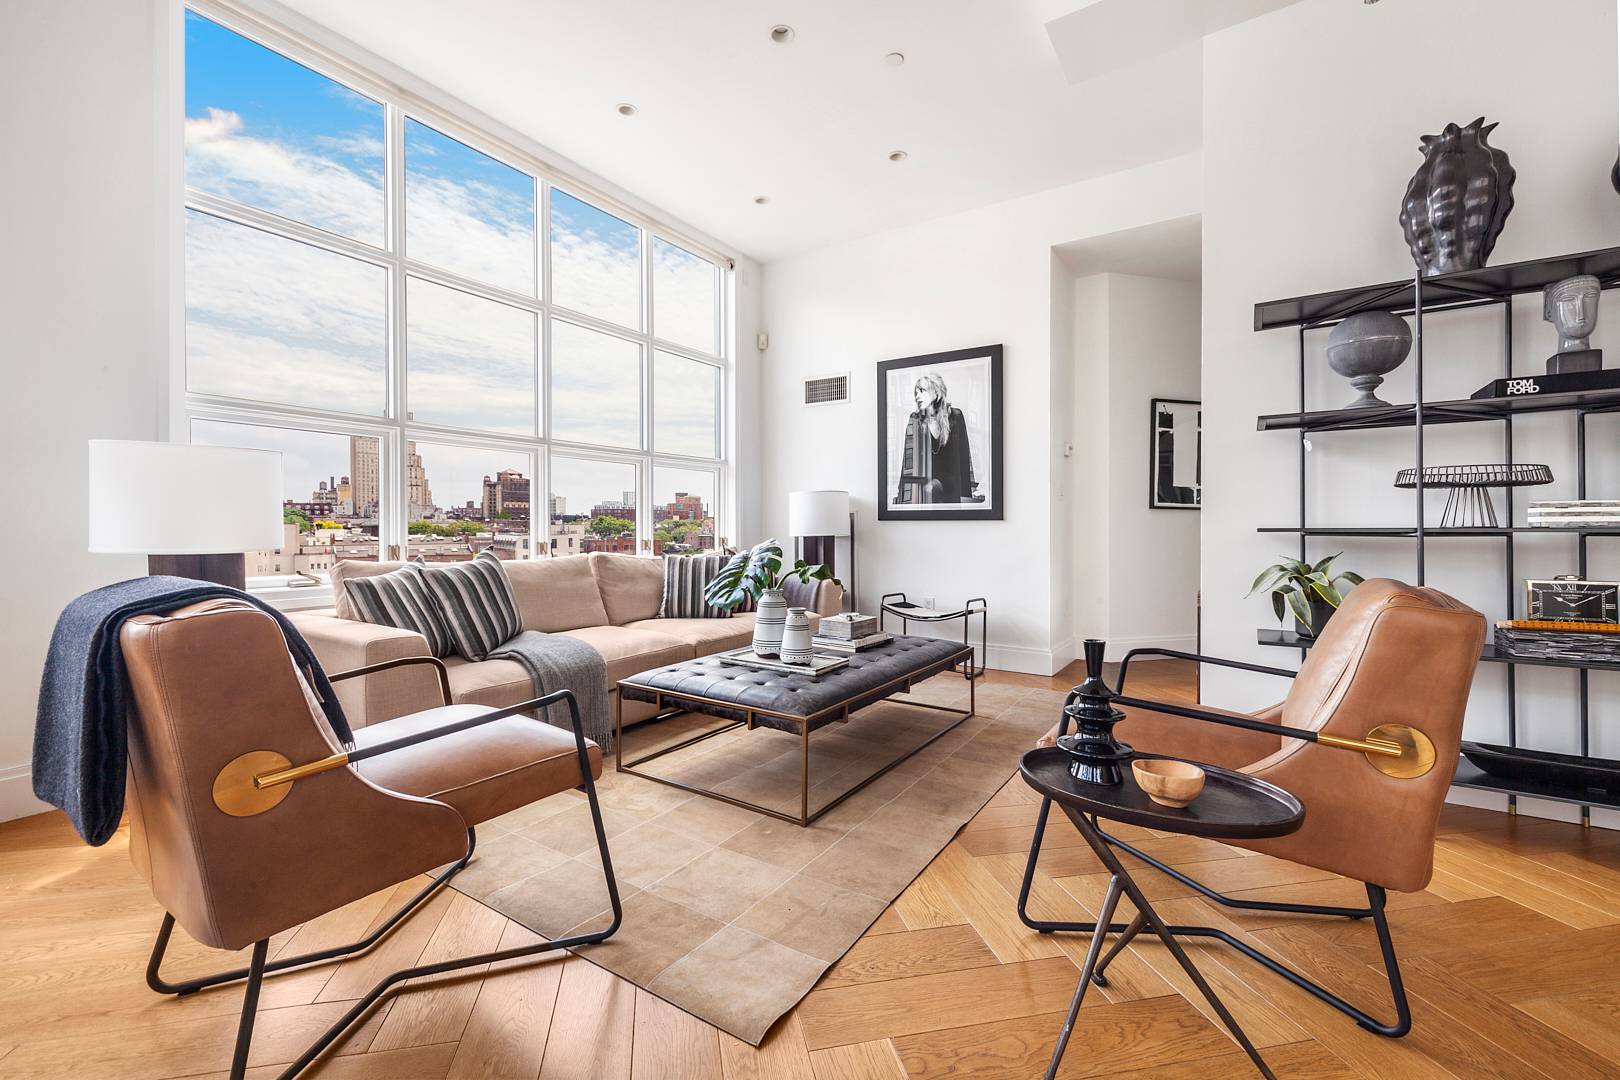 Enjoy DUMBO penthouse splendor in this spectacular full floor three bedroom, two bathroom condominium showplace with a private rooftop terrace.